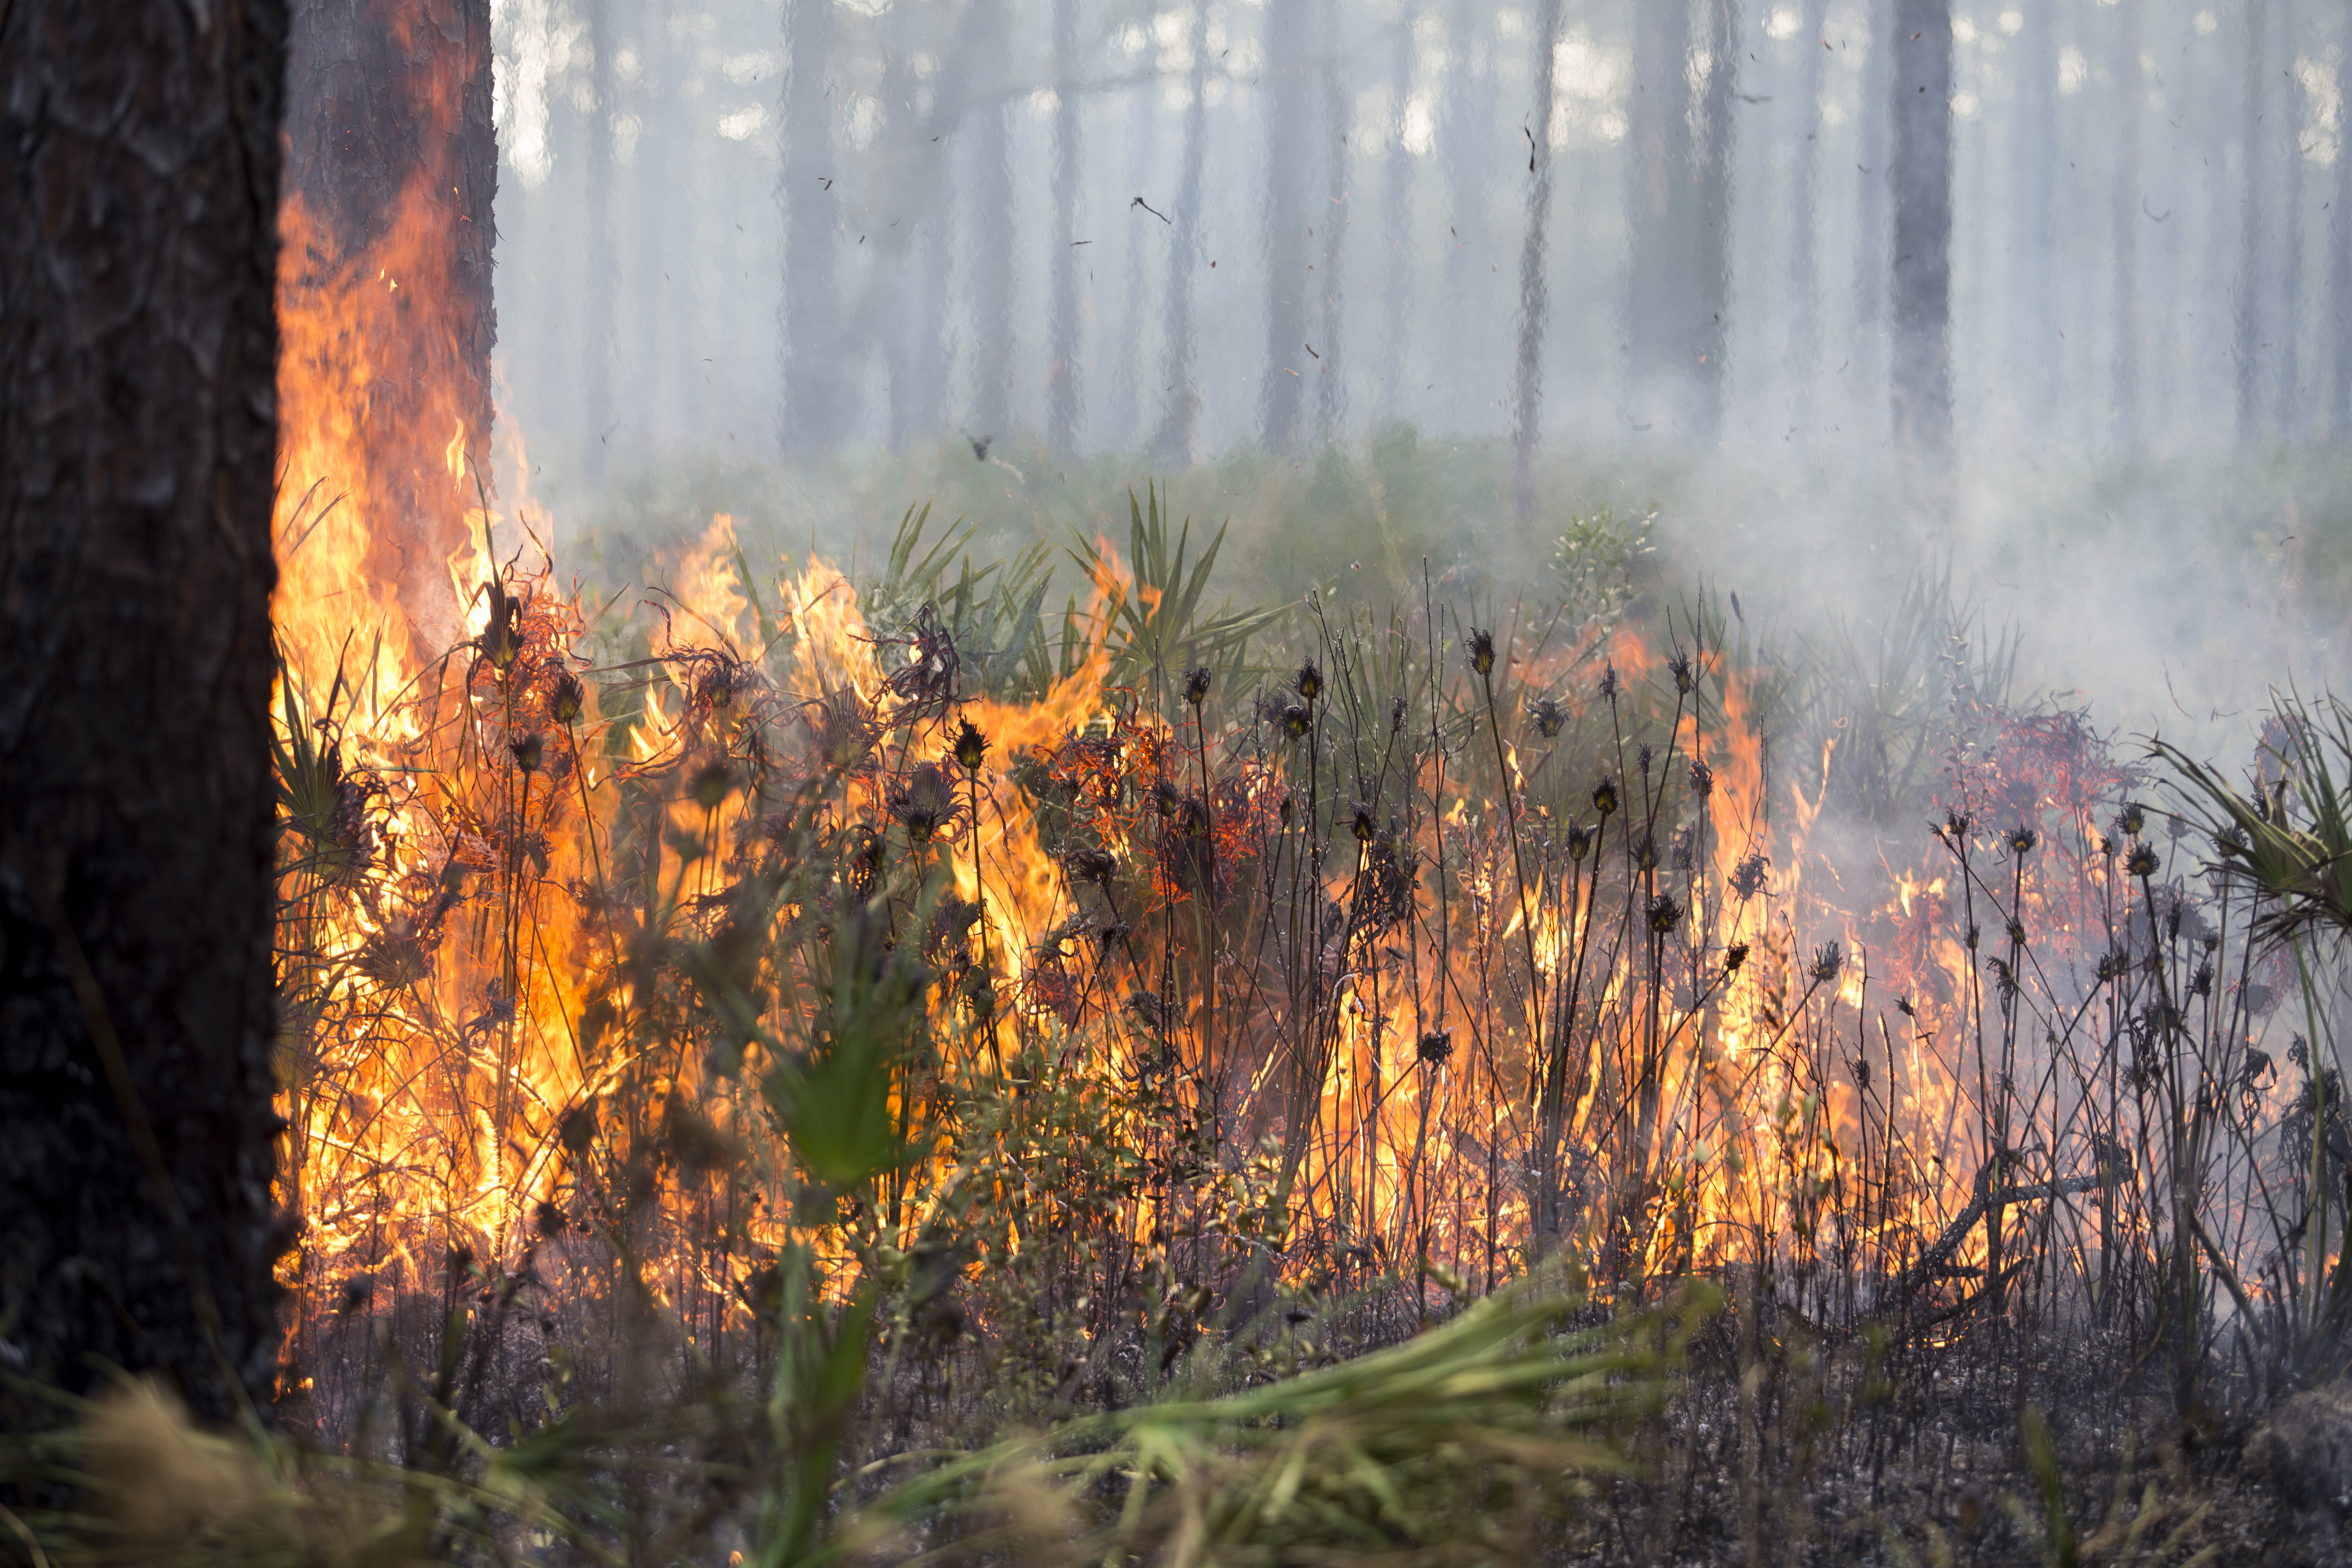 A controlled burn at Austin Cary Memorial Forest. The focus of the image is bright orange fire burning shrubs and understory plants. Pine trunks are visible in the foreground and background, which is filled with lots of smoke.